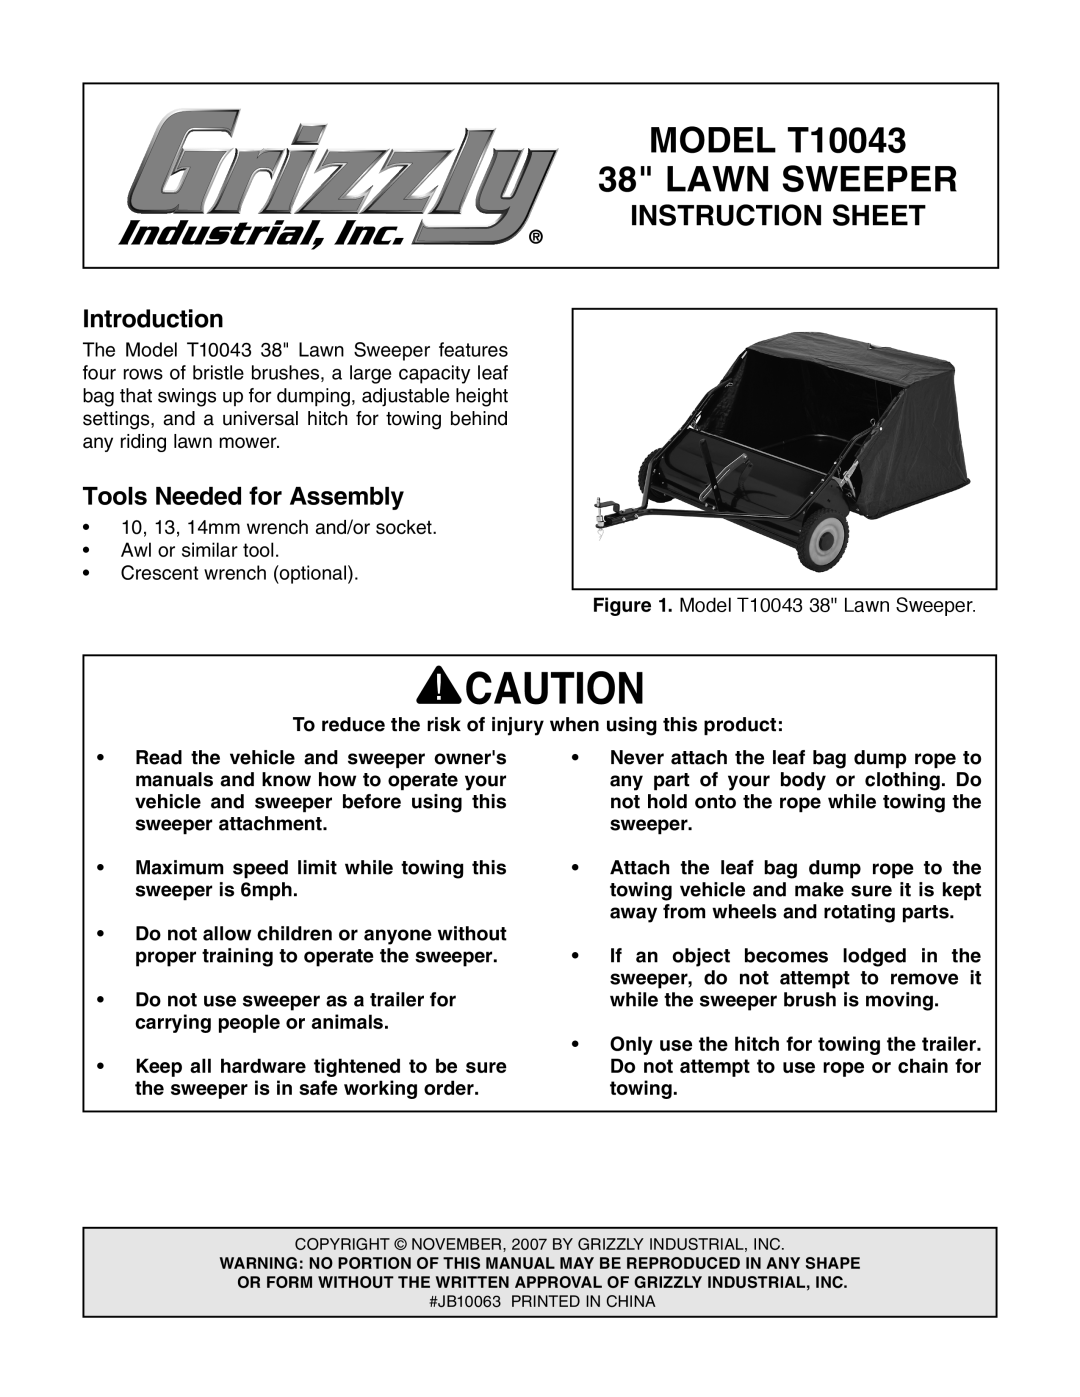 Grizzly instruction sheet Introduction, Tools Needed for Assembly, MODEL T10043, Lawn Sweeper, Instruction Sheet 